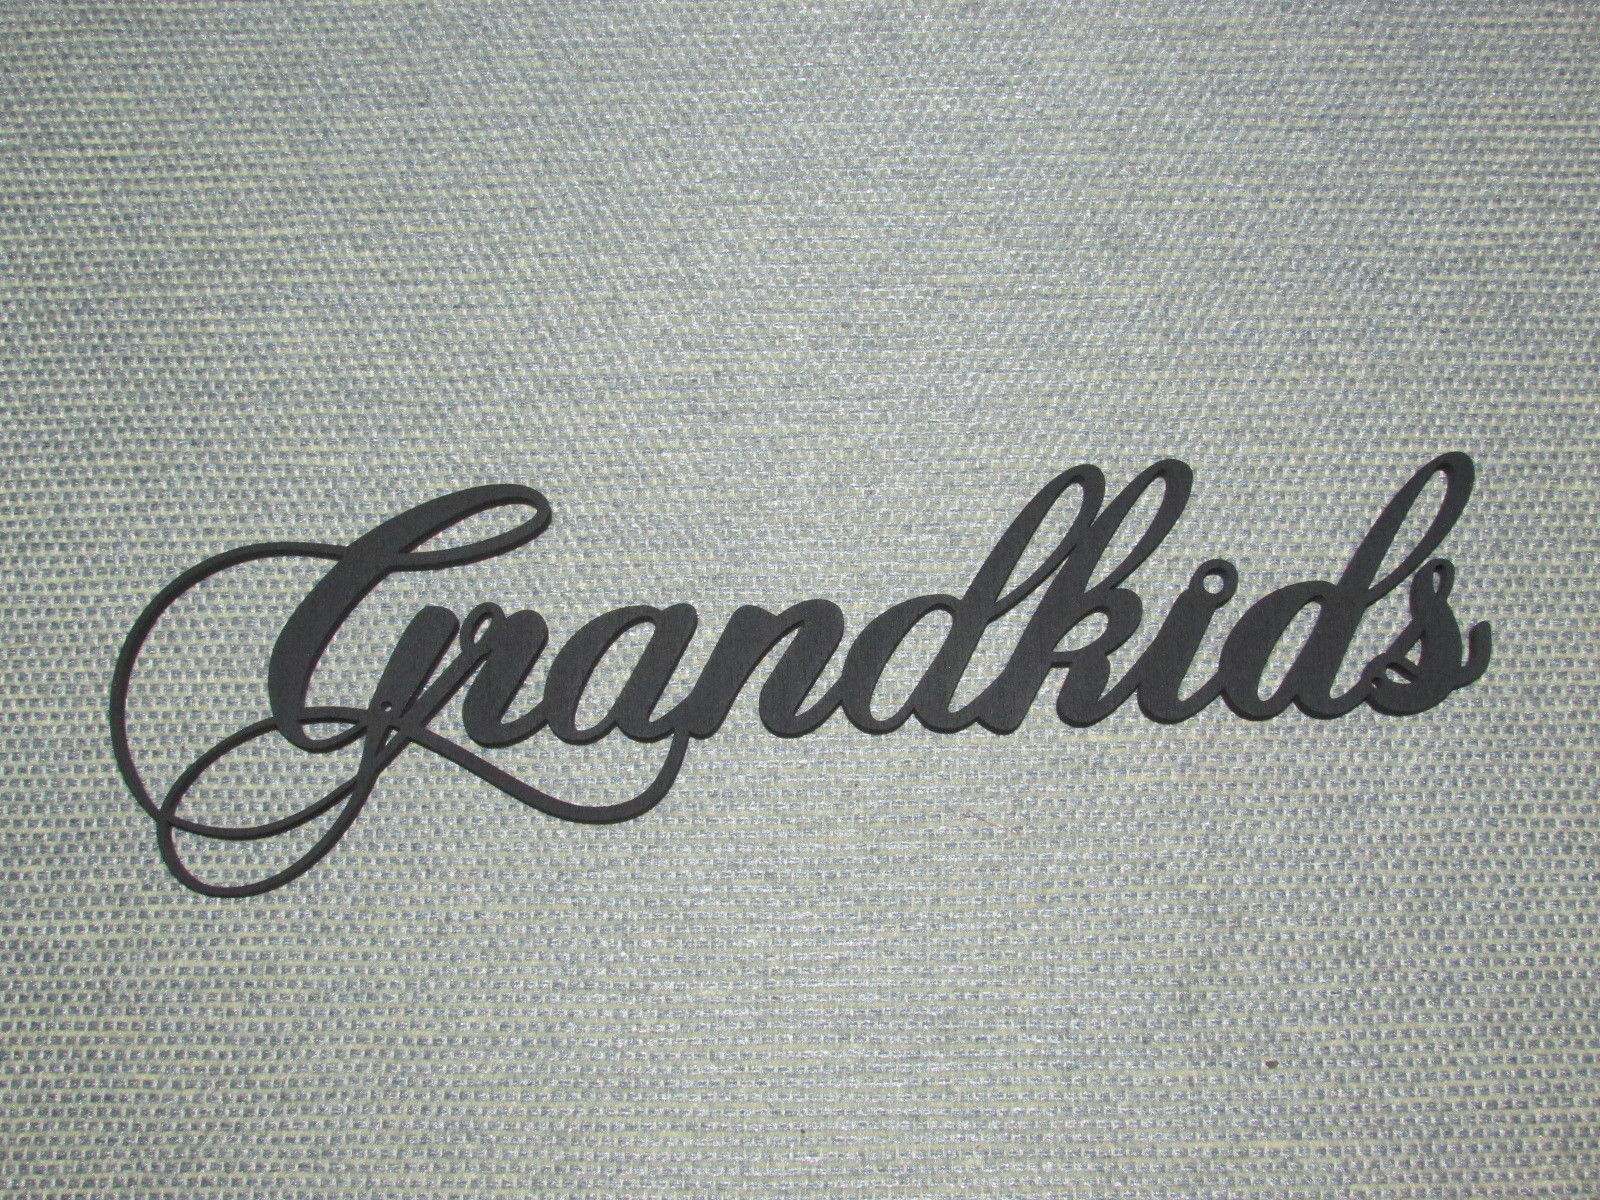 Primary image for Grandkids wooden wall word art decor Grand kids